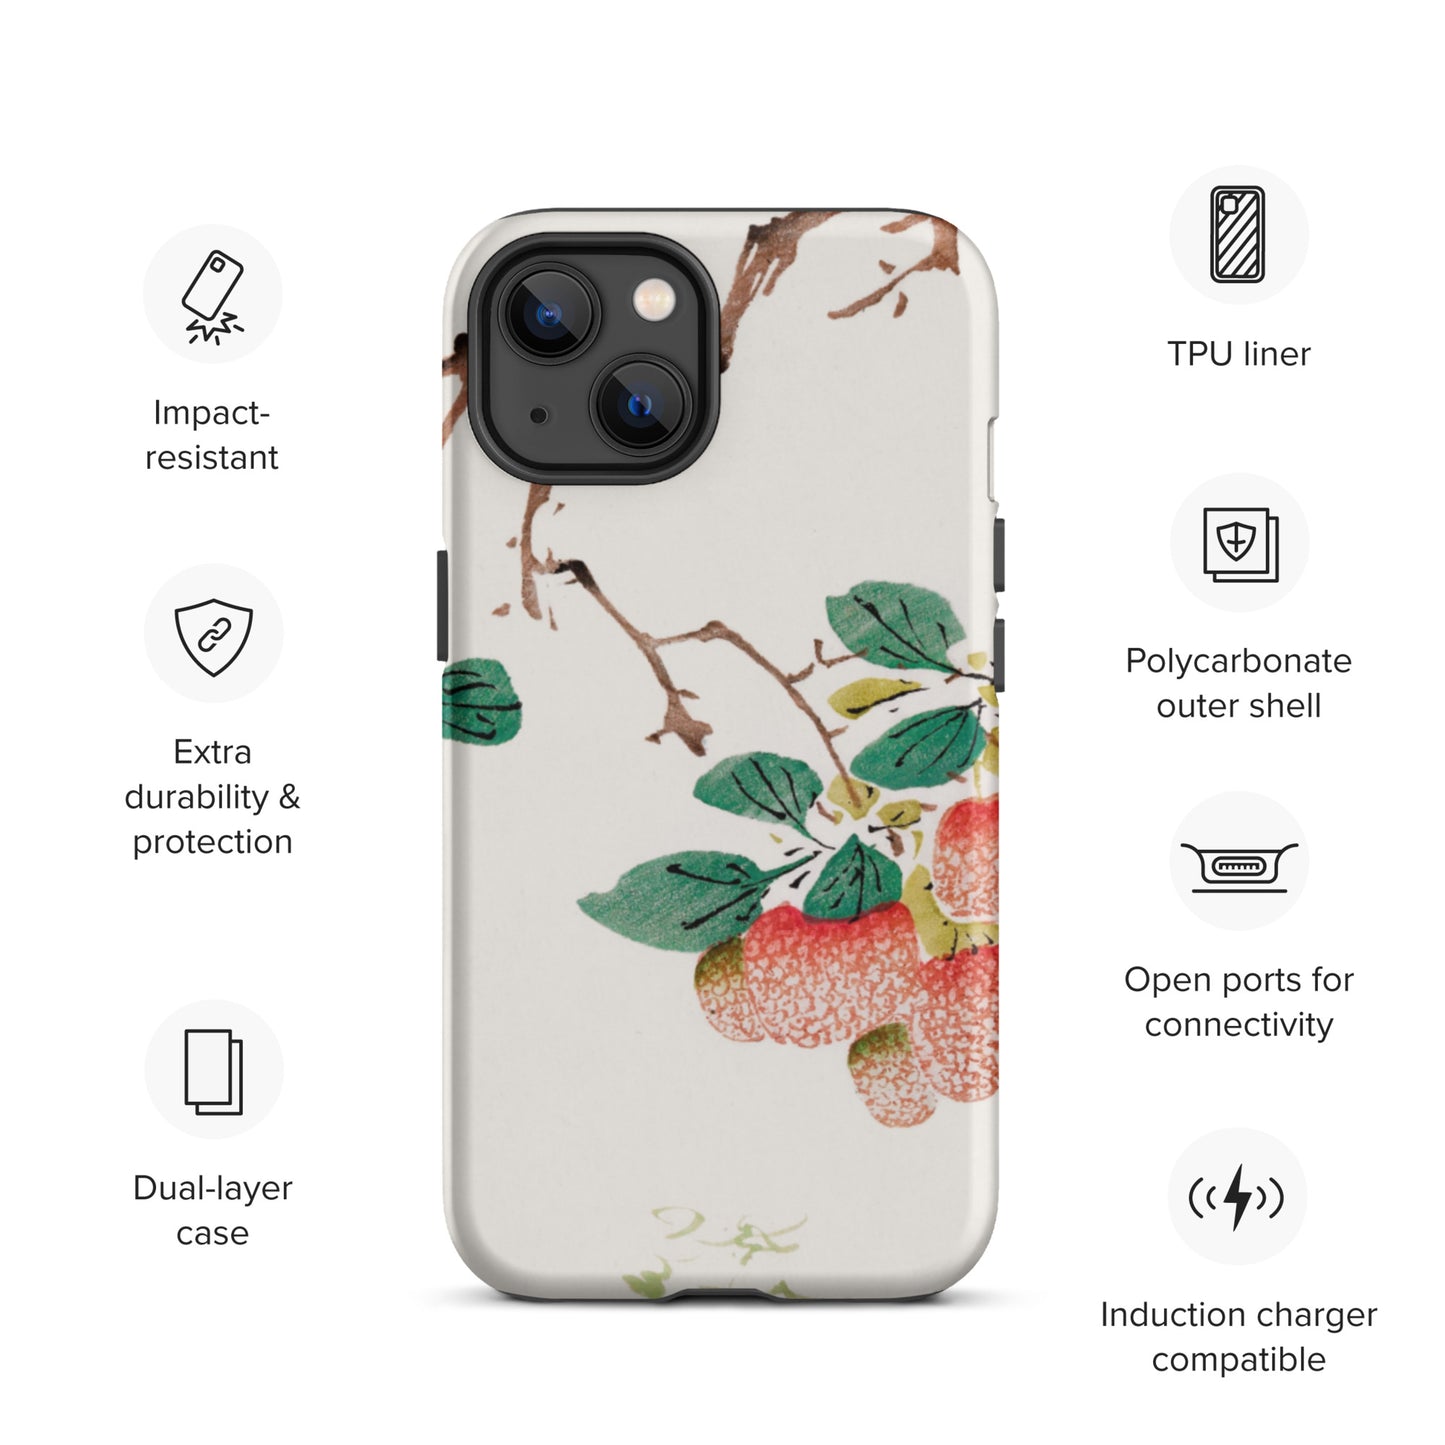 Lychee - Tough iPhone case